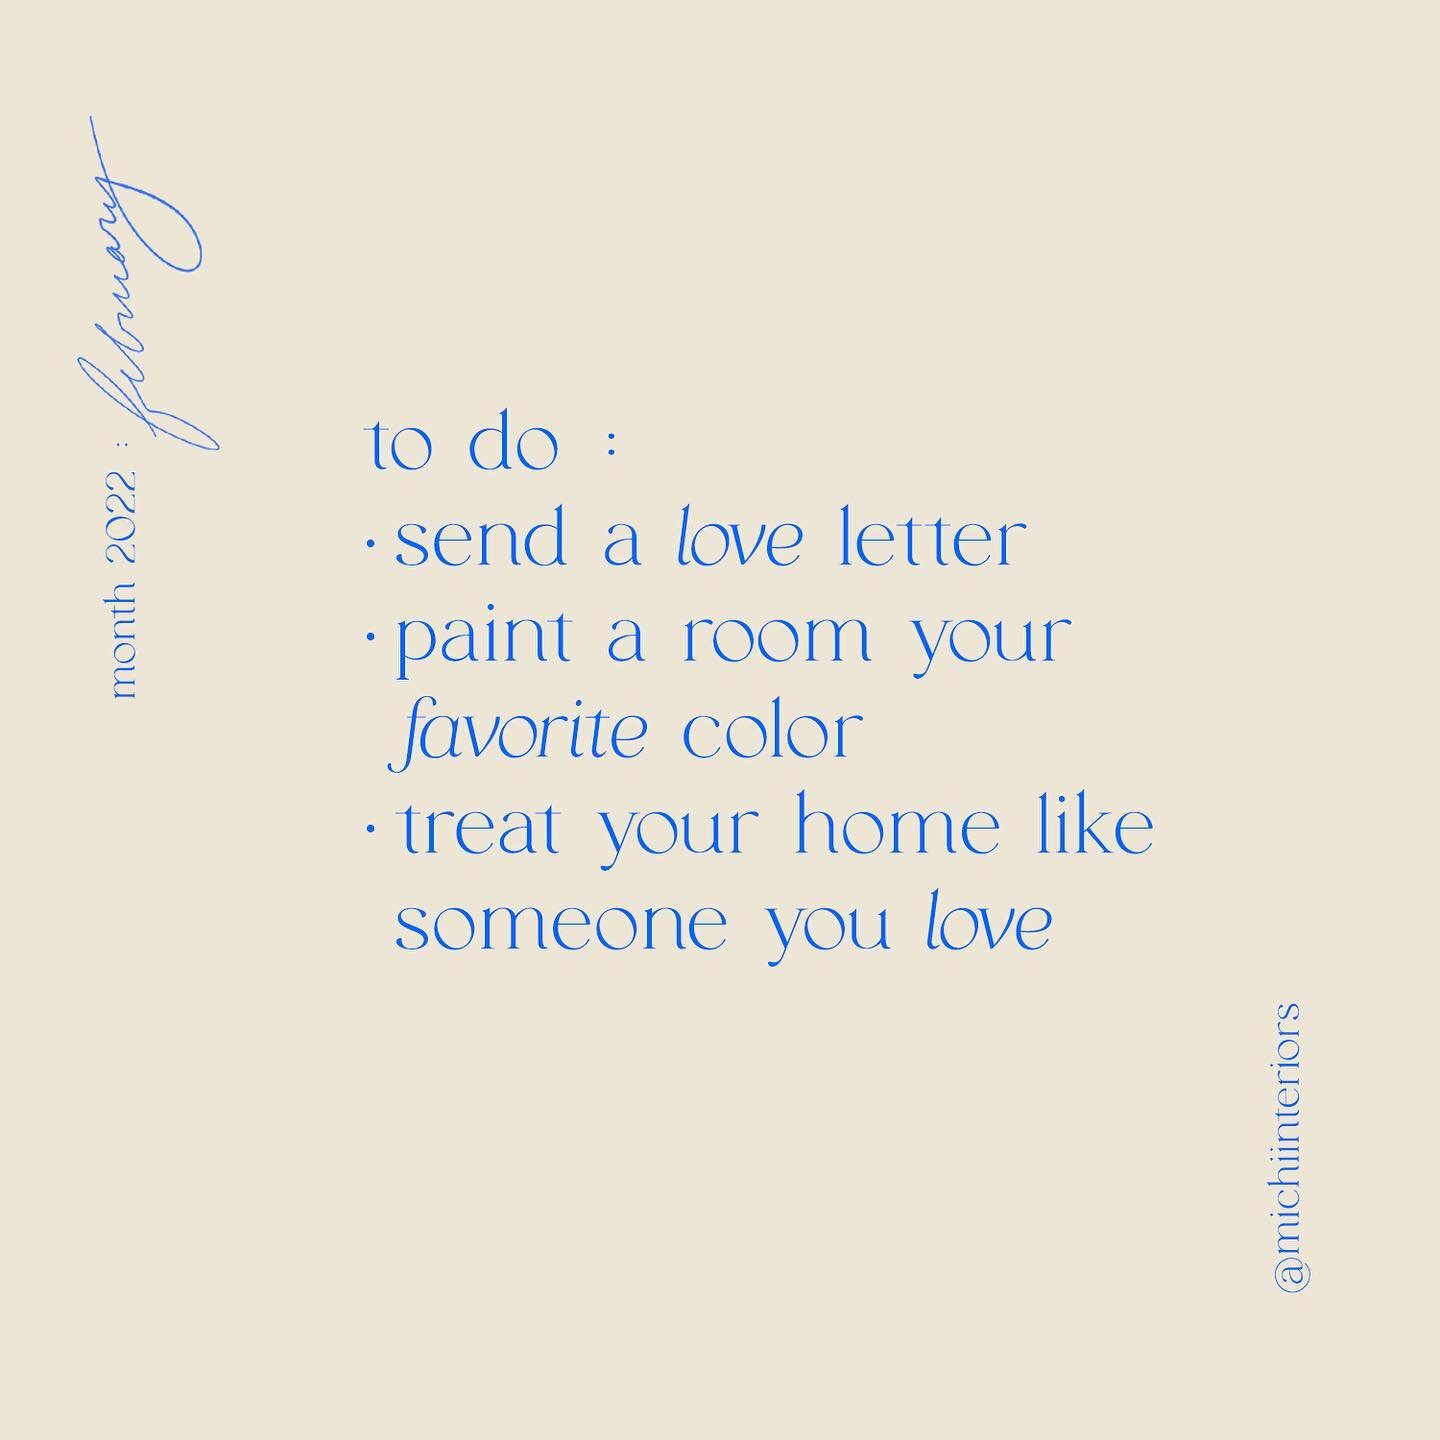 Share the love in your stories ✨&amp; tag your friends you love in the comments! ✨ 

#share #interiordesignaddict #interiordesigninspiration #branding #todolist #organized #february #interiordesignideas #sharethelove #shareyourstory #shareyourheart #